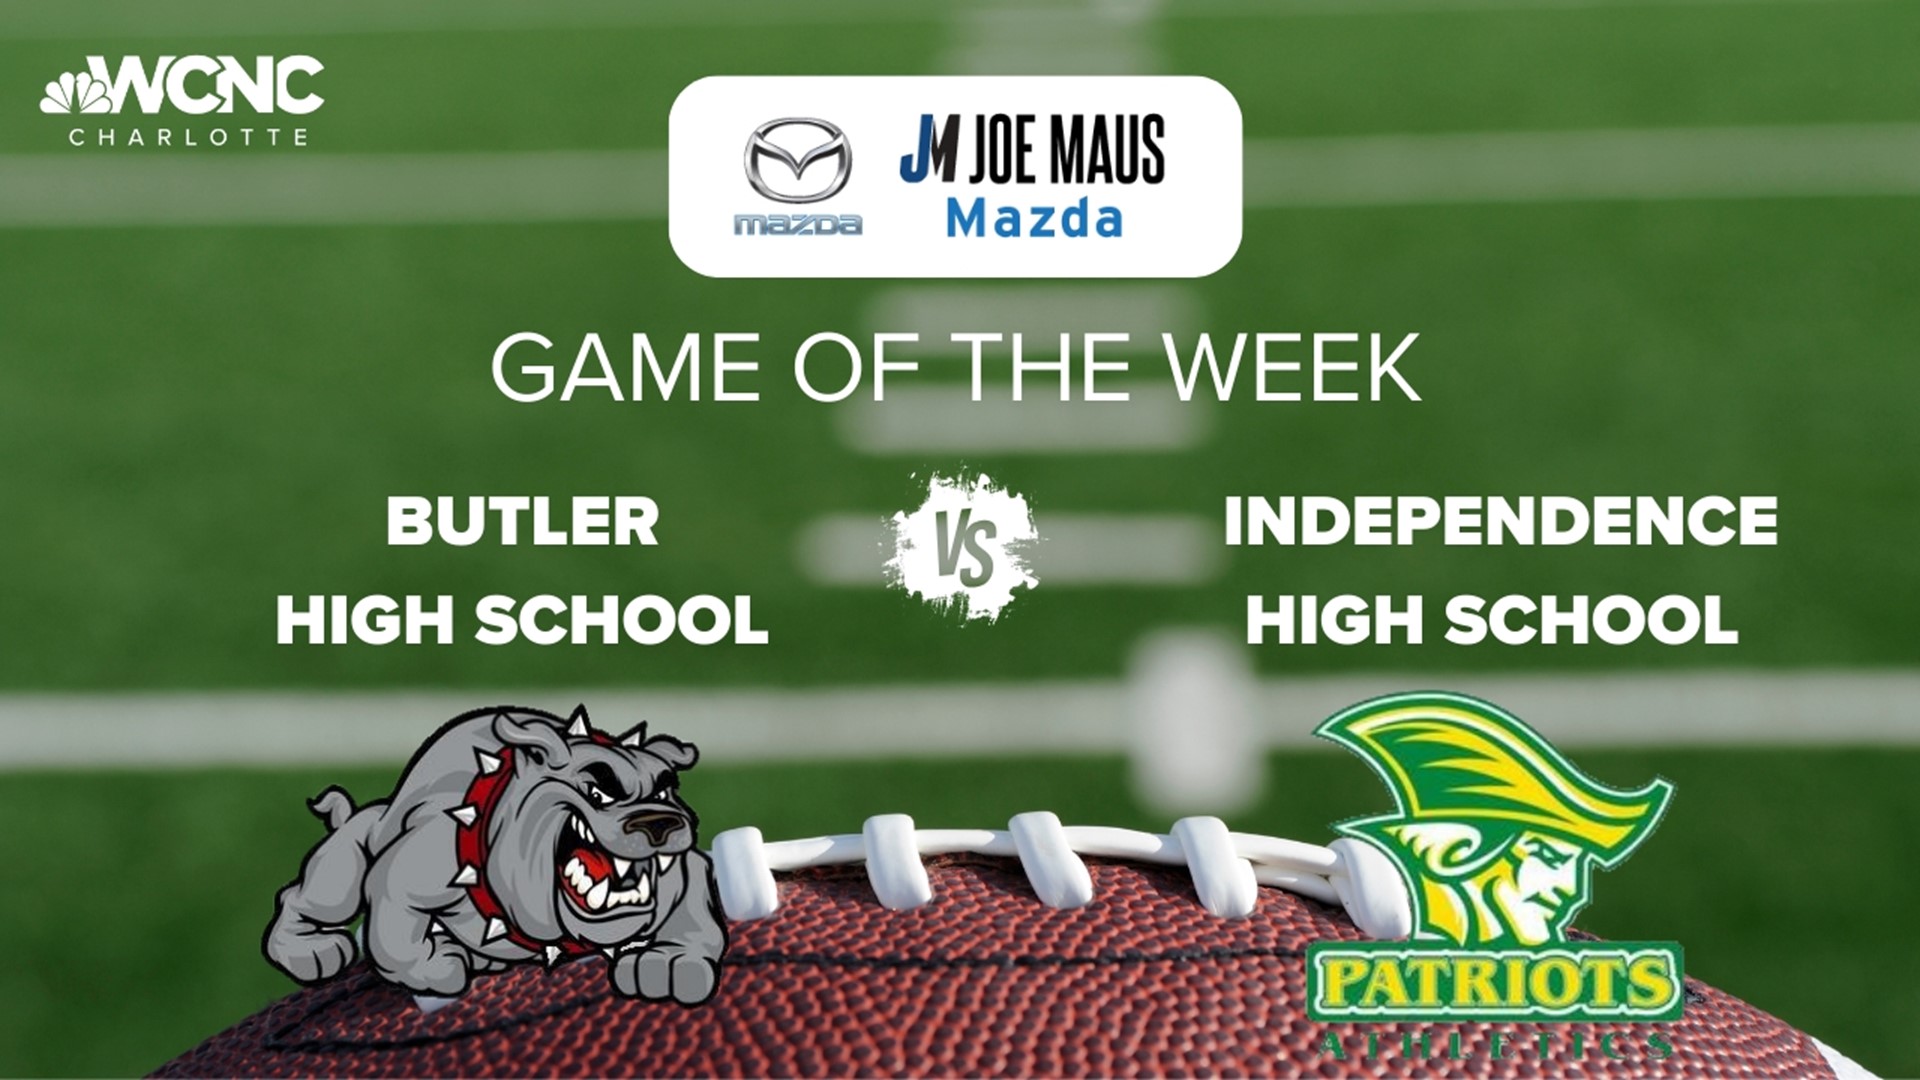 When Independence and Butler clash, who wins to move on in the playoffs?